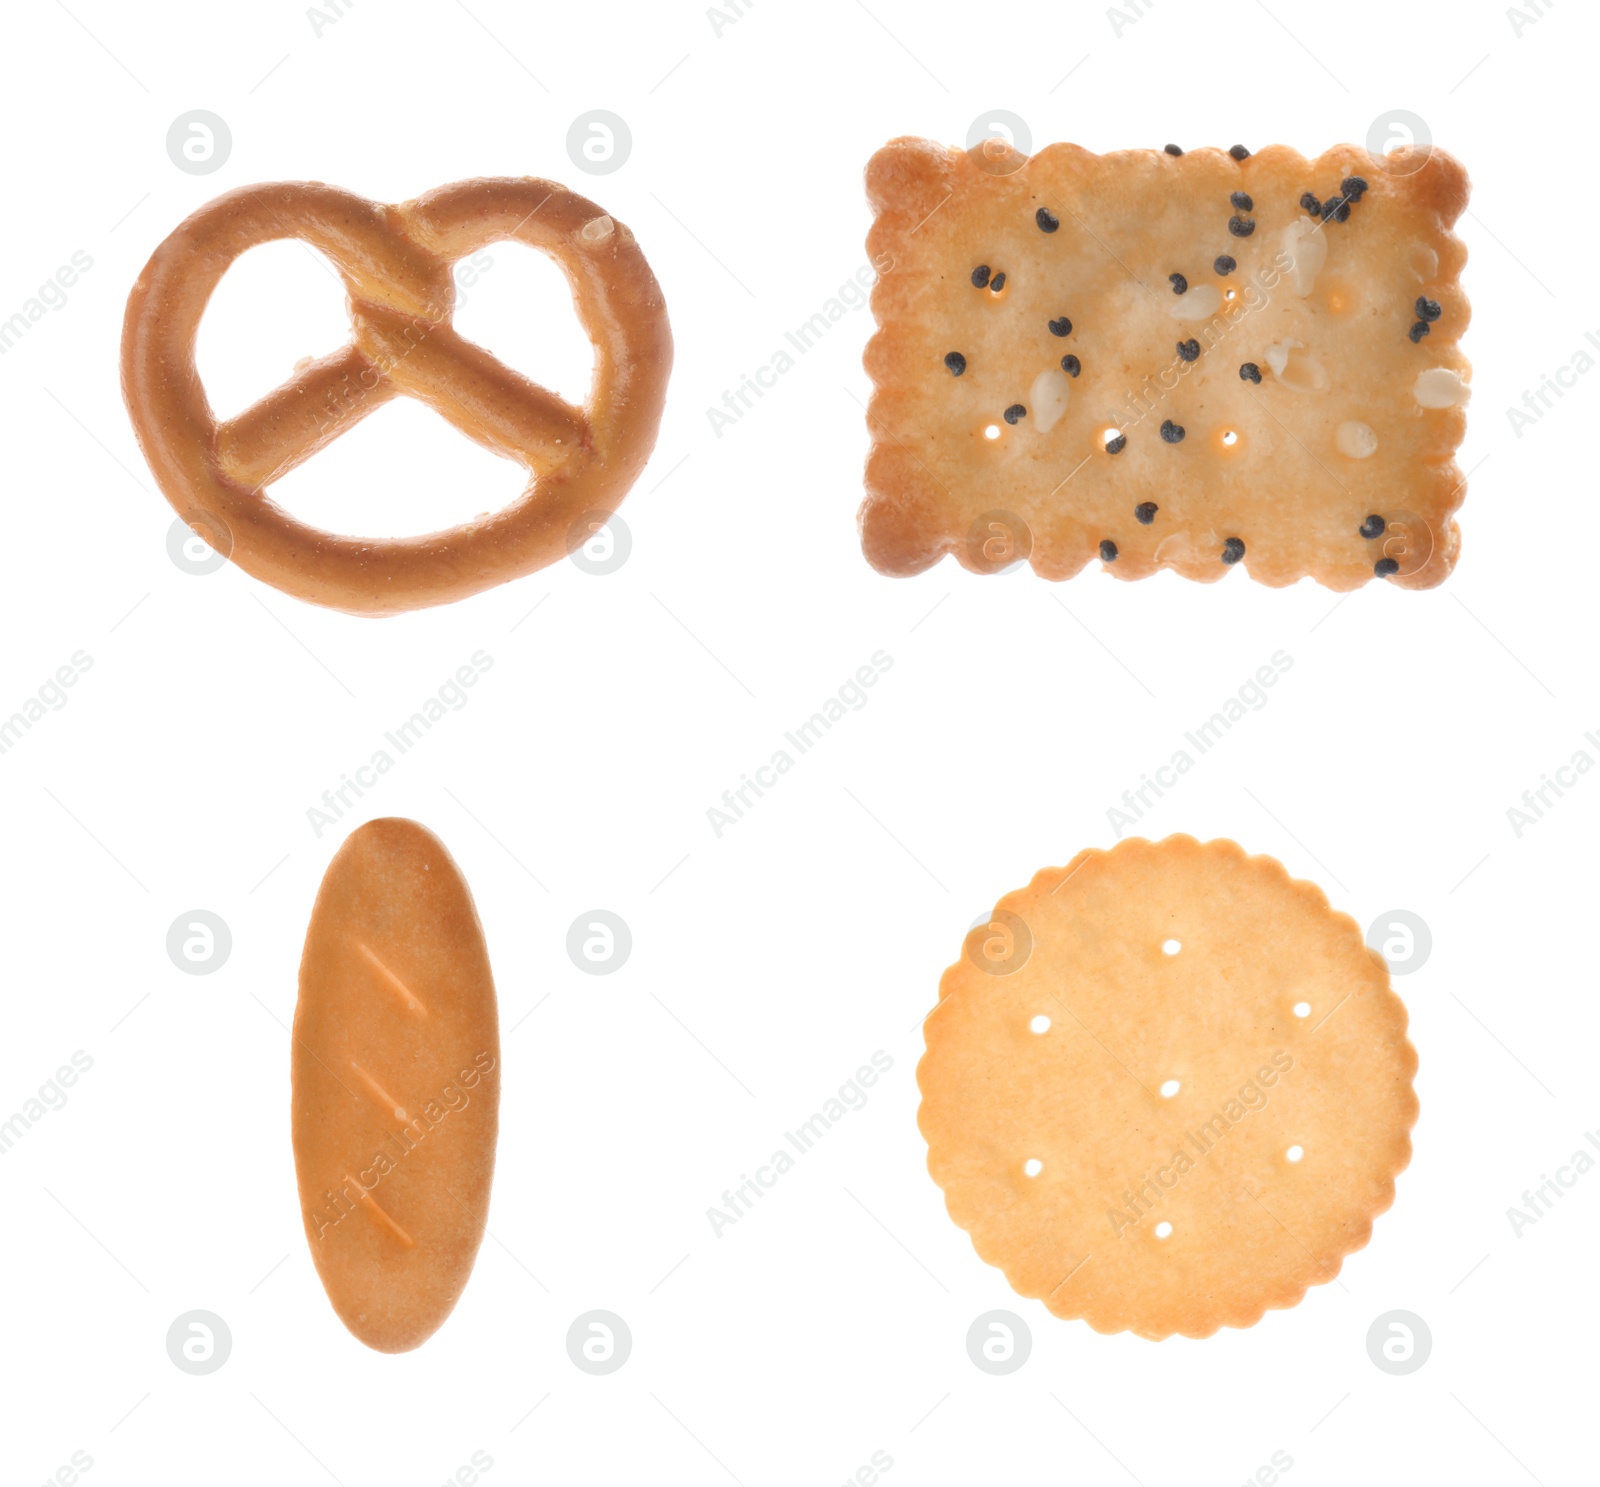 Image of Collage of different tasty crackers on white background